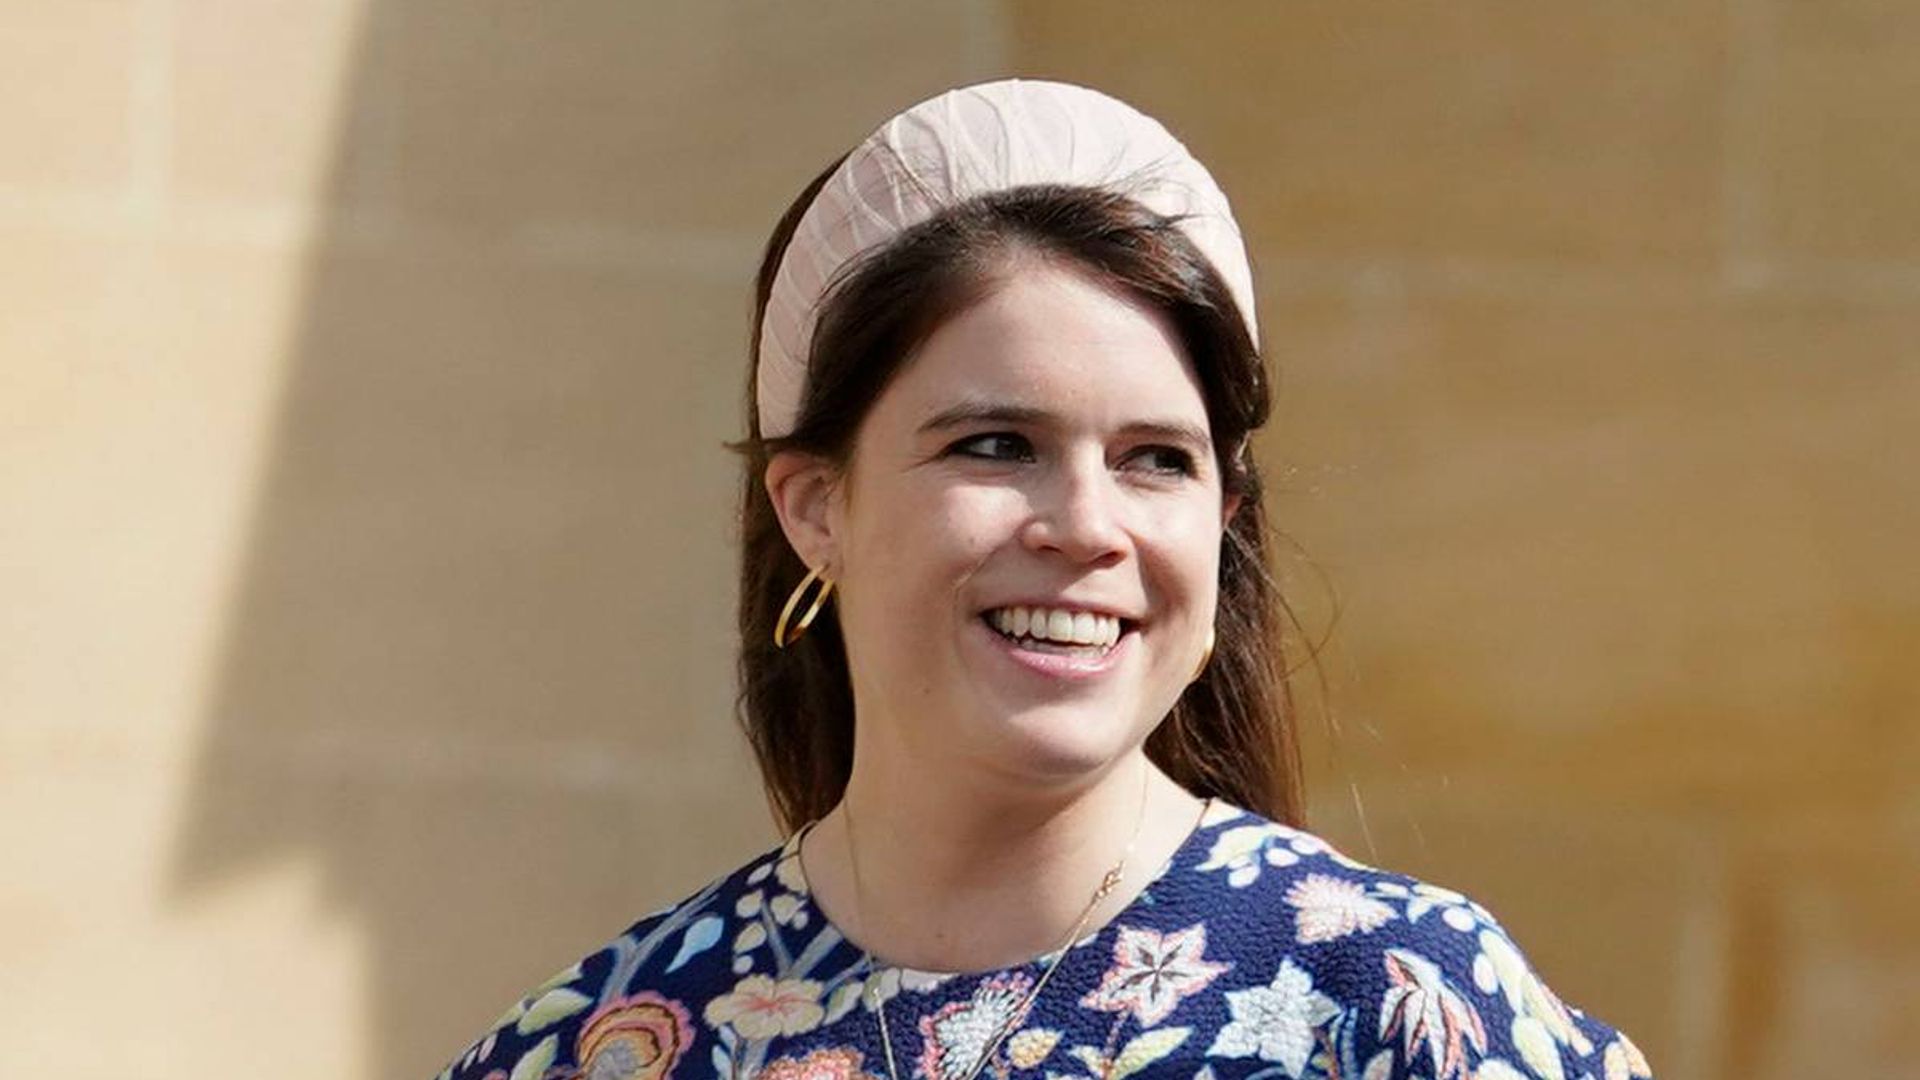 Princess Eugenie wows in stunning floral dress for Easter Sunday service